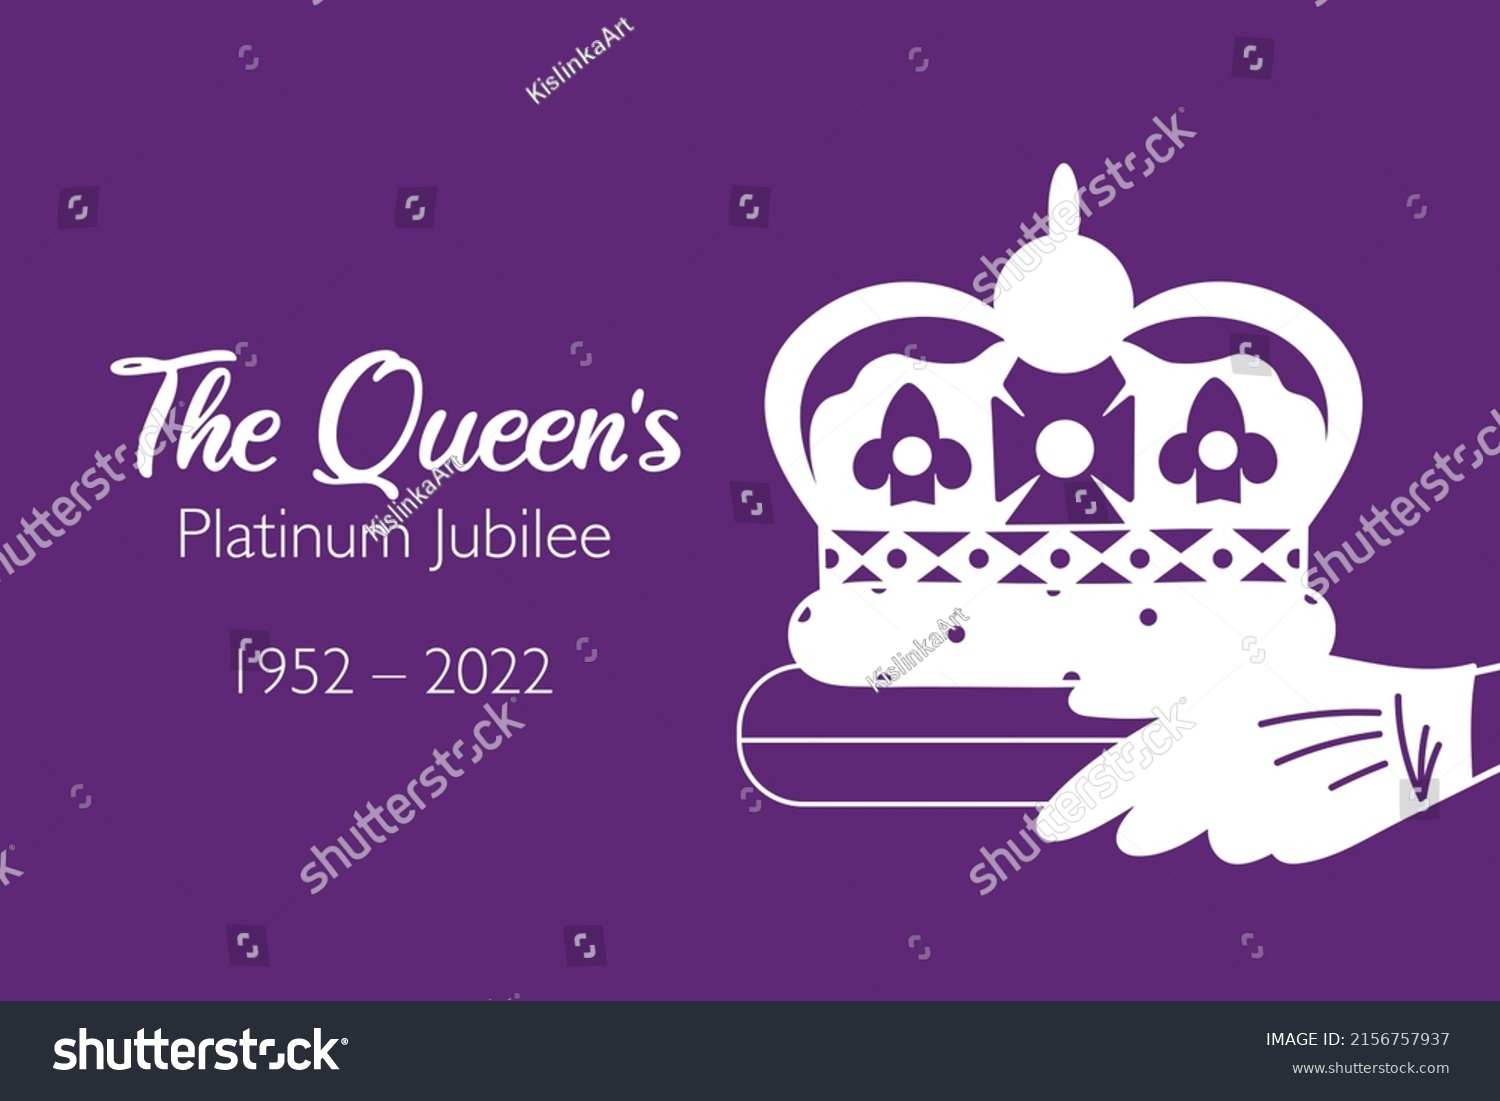 SVG of The Queen's Platinum Jubilee celebration banner Queen Elizabeth’s crown coronation 70 years. Ideal design for banners, flayers, social media, stickers, greeting cards.  svg